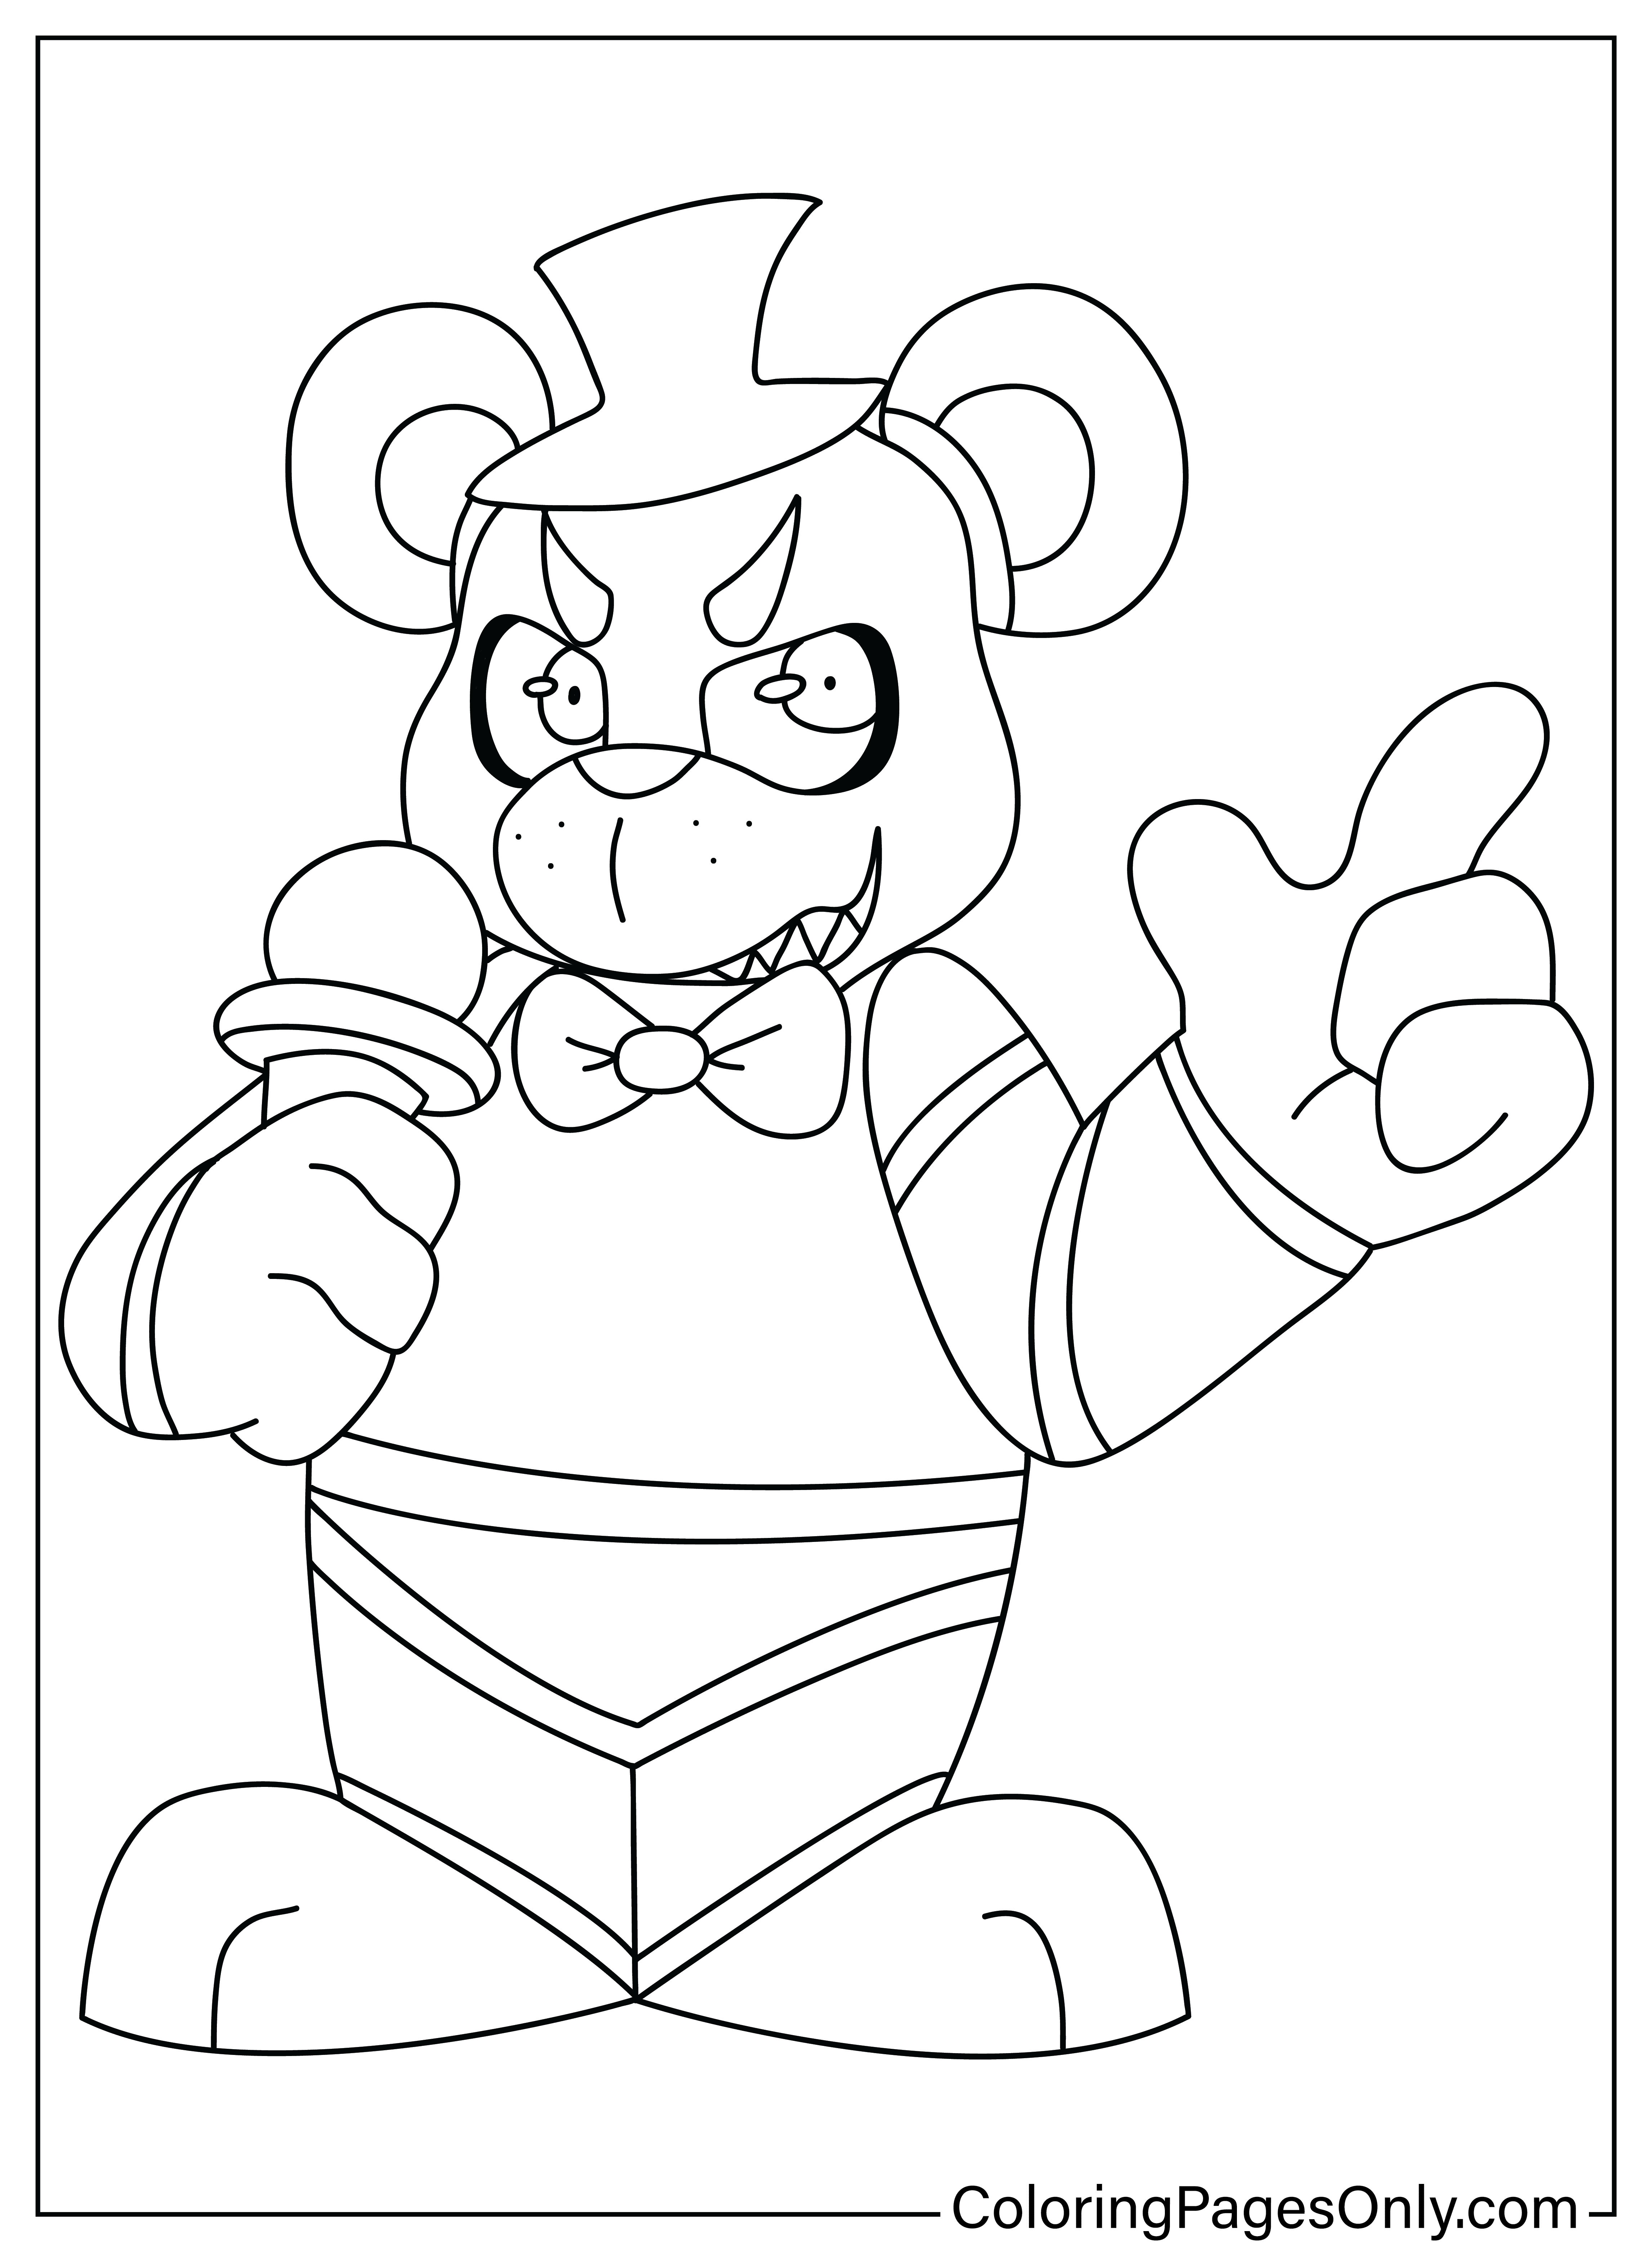 Freddy Fazbear Images to Color